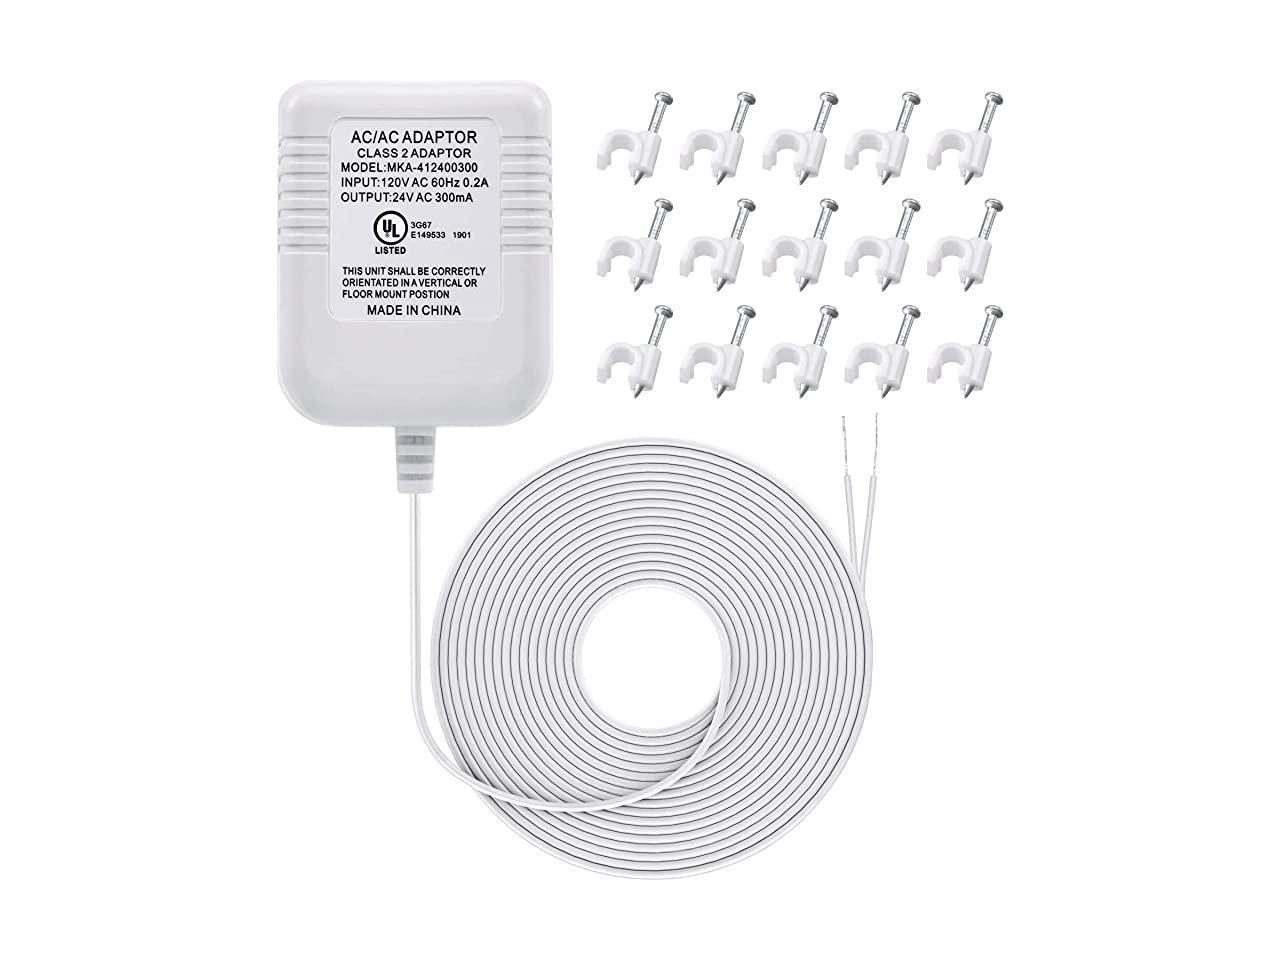 Volt Transformer C Wire Adapter Thermostats Compatible with Ecobee Nest